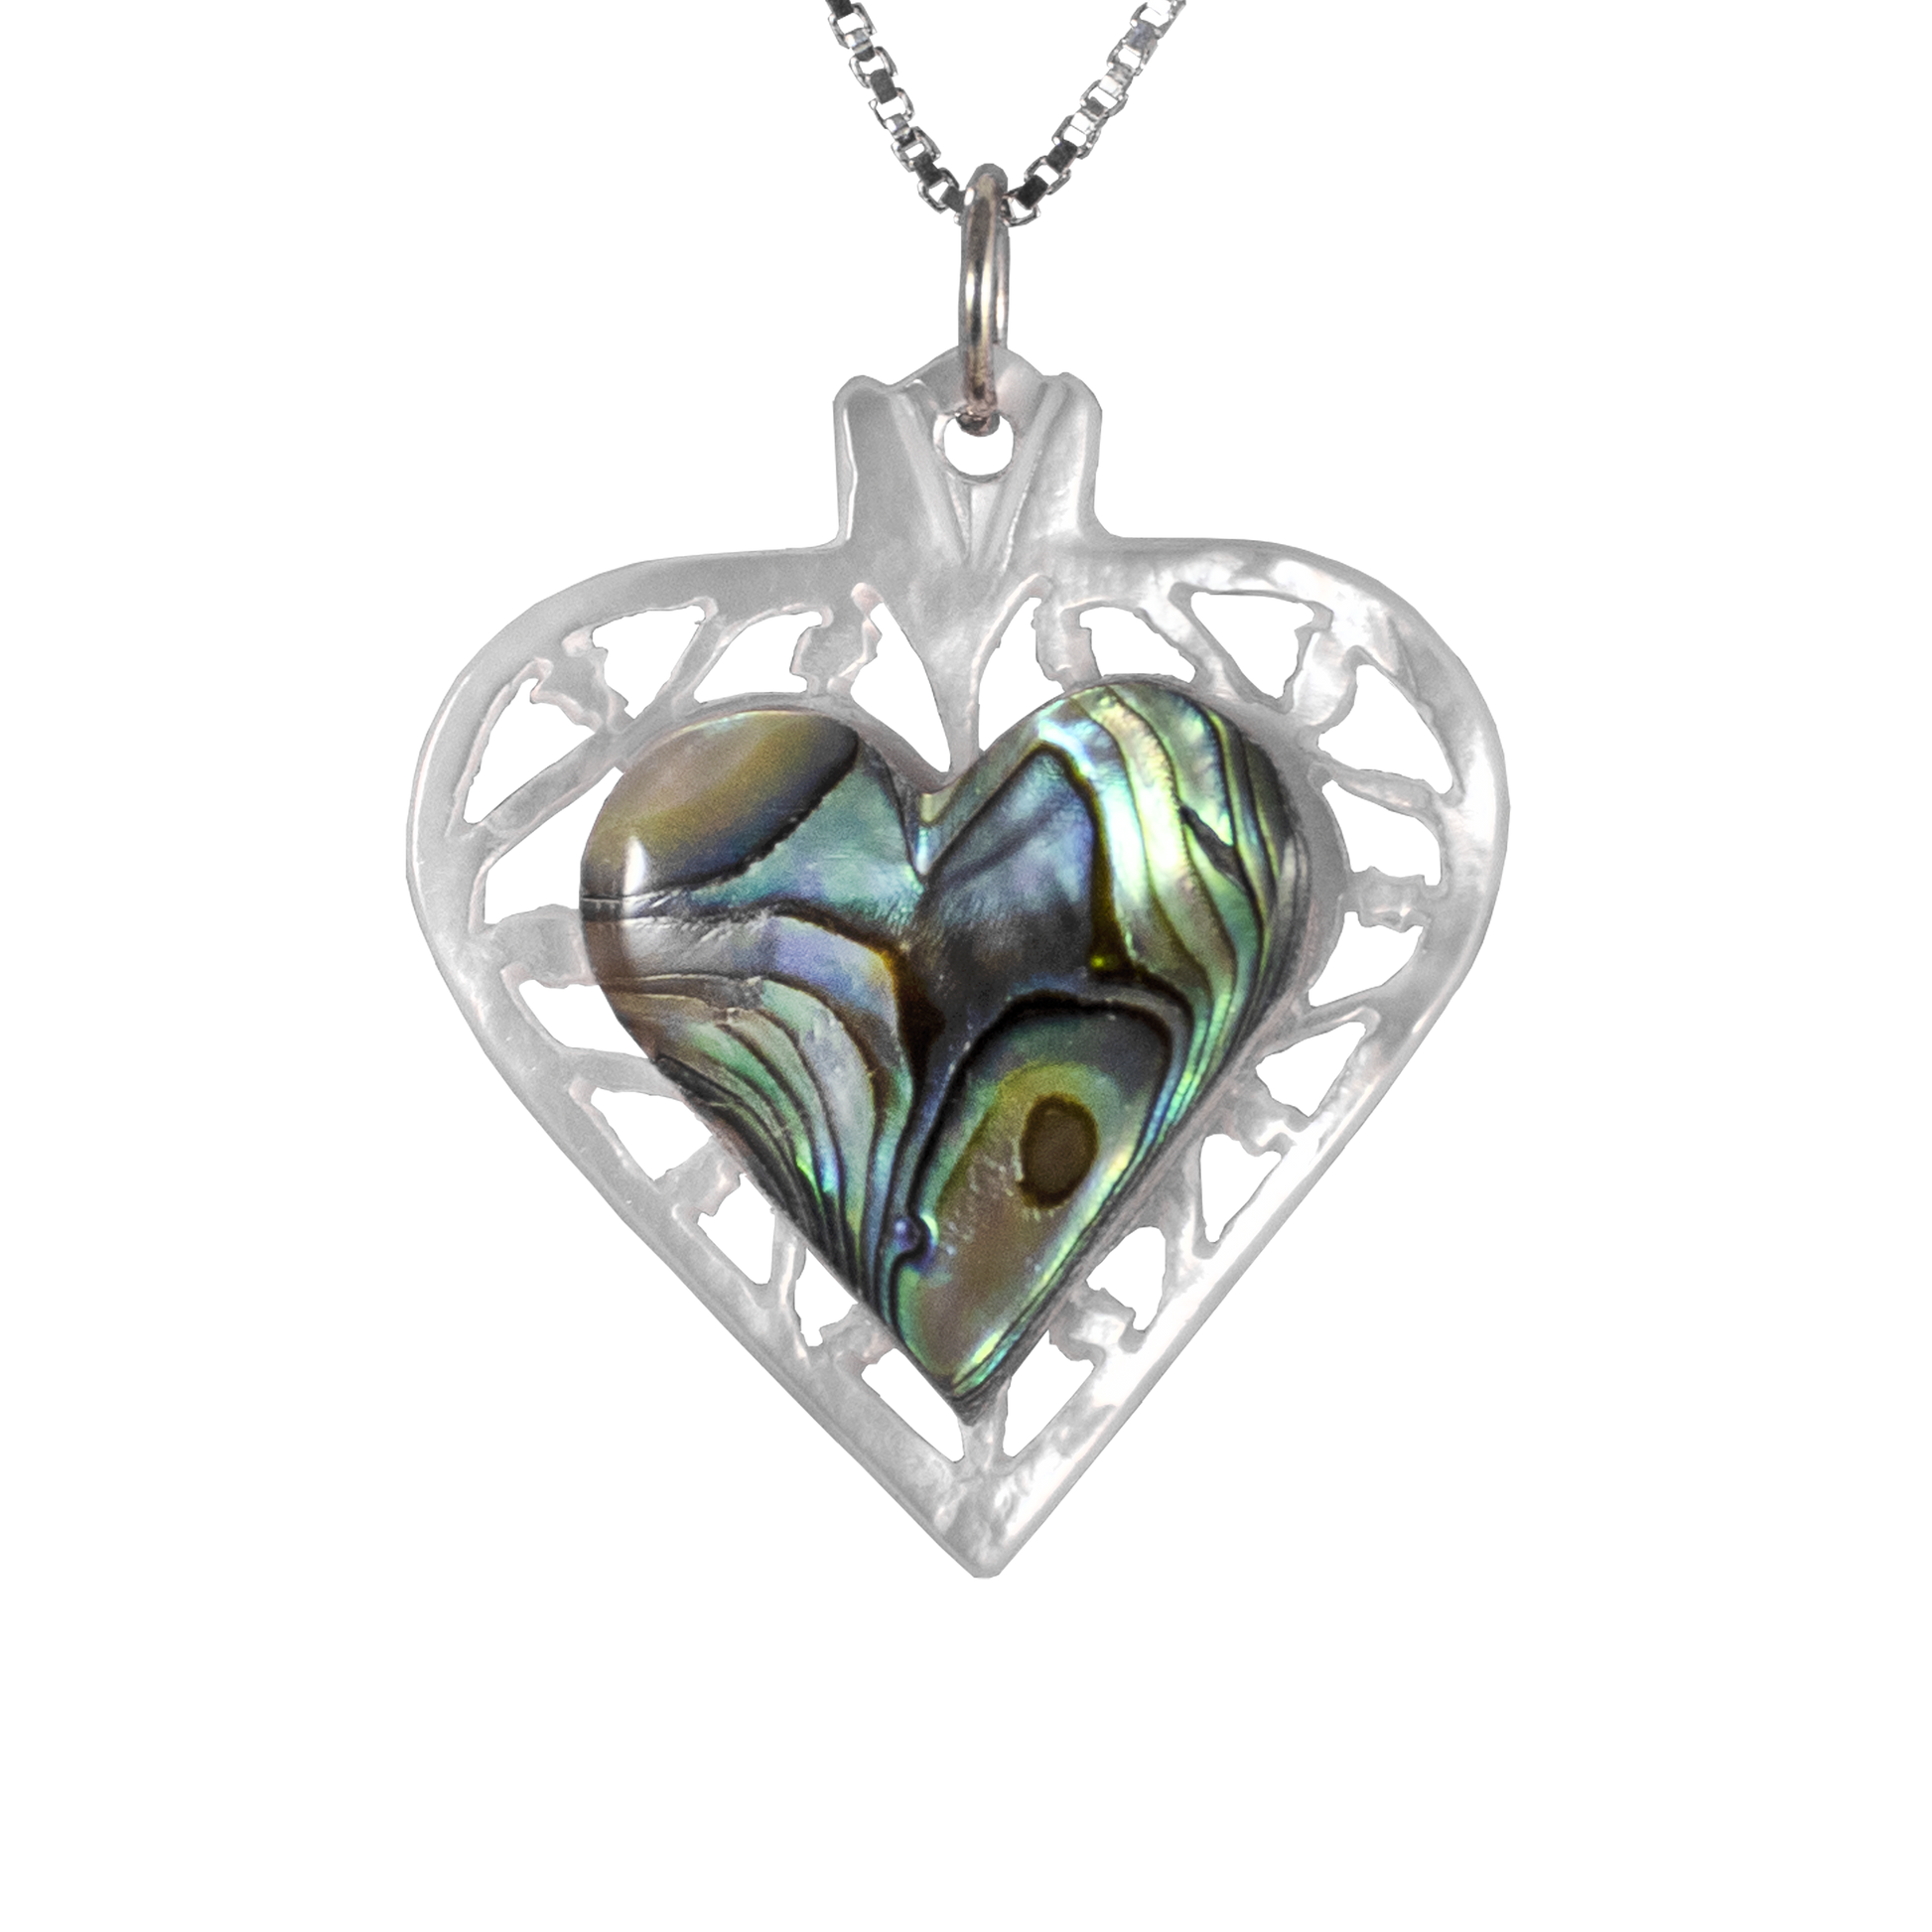 Heart Mother of Pearl with Abalone Heart in Center on sterling silver chain